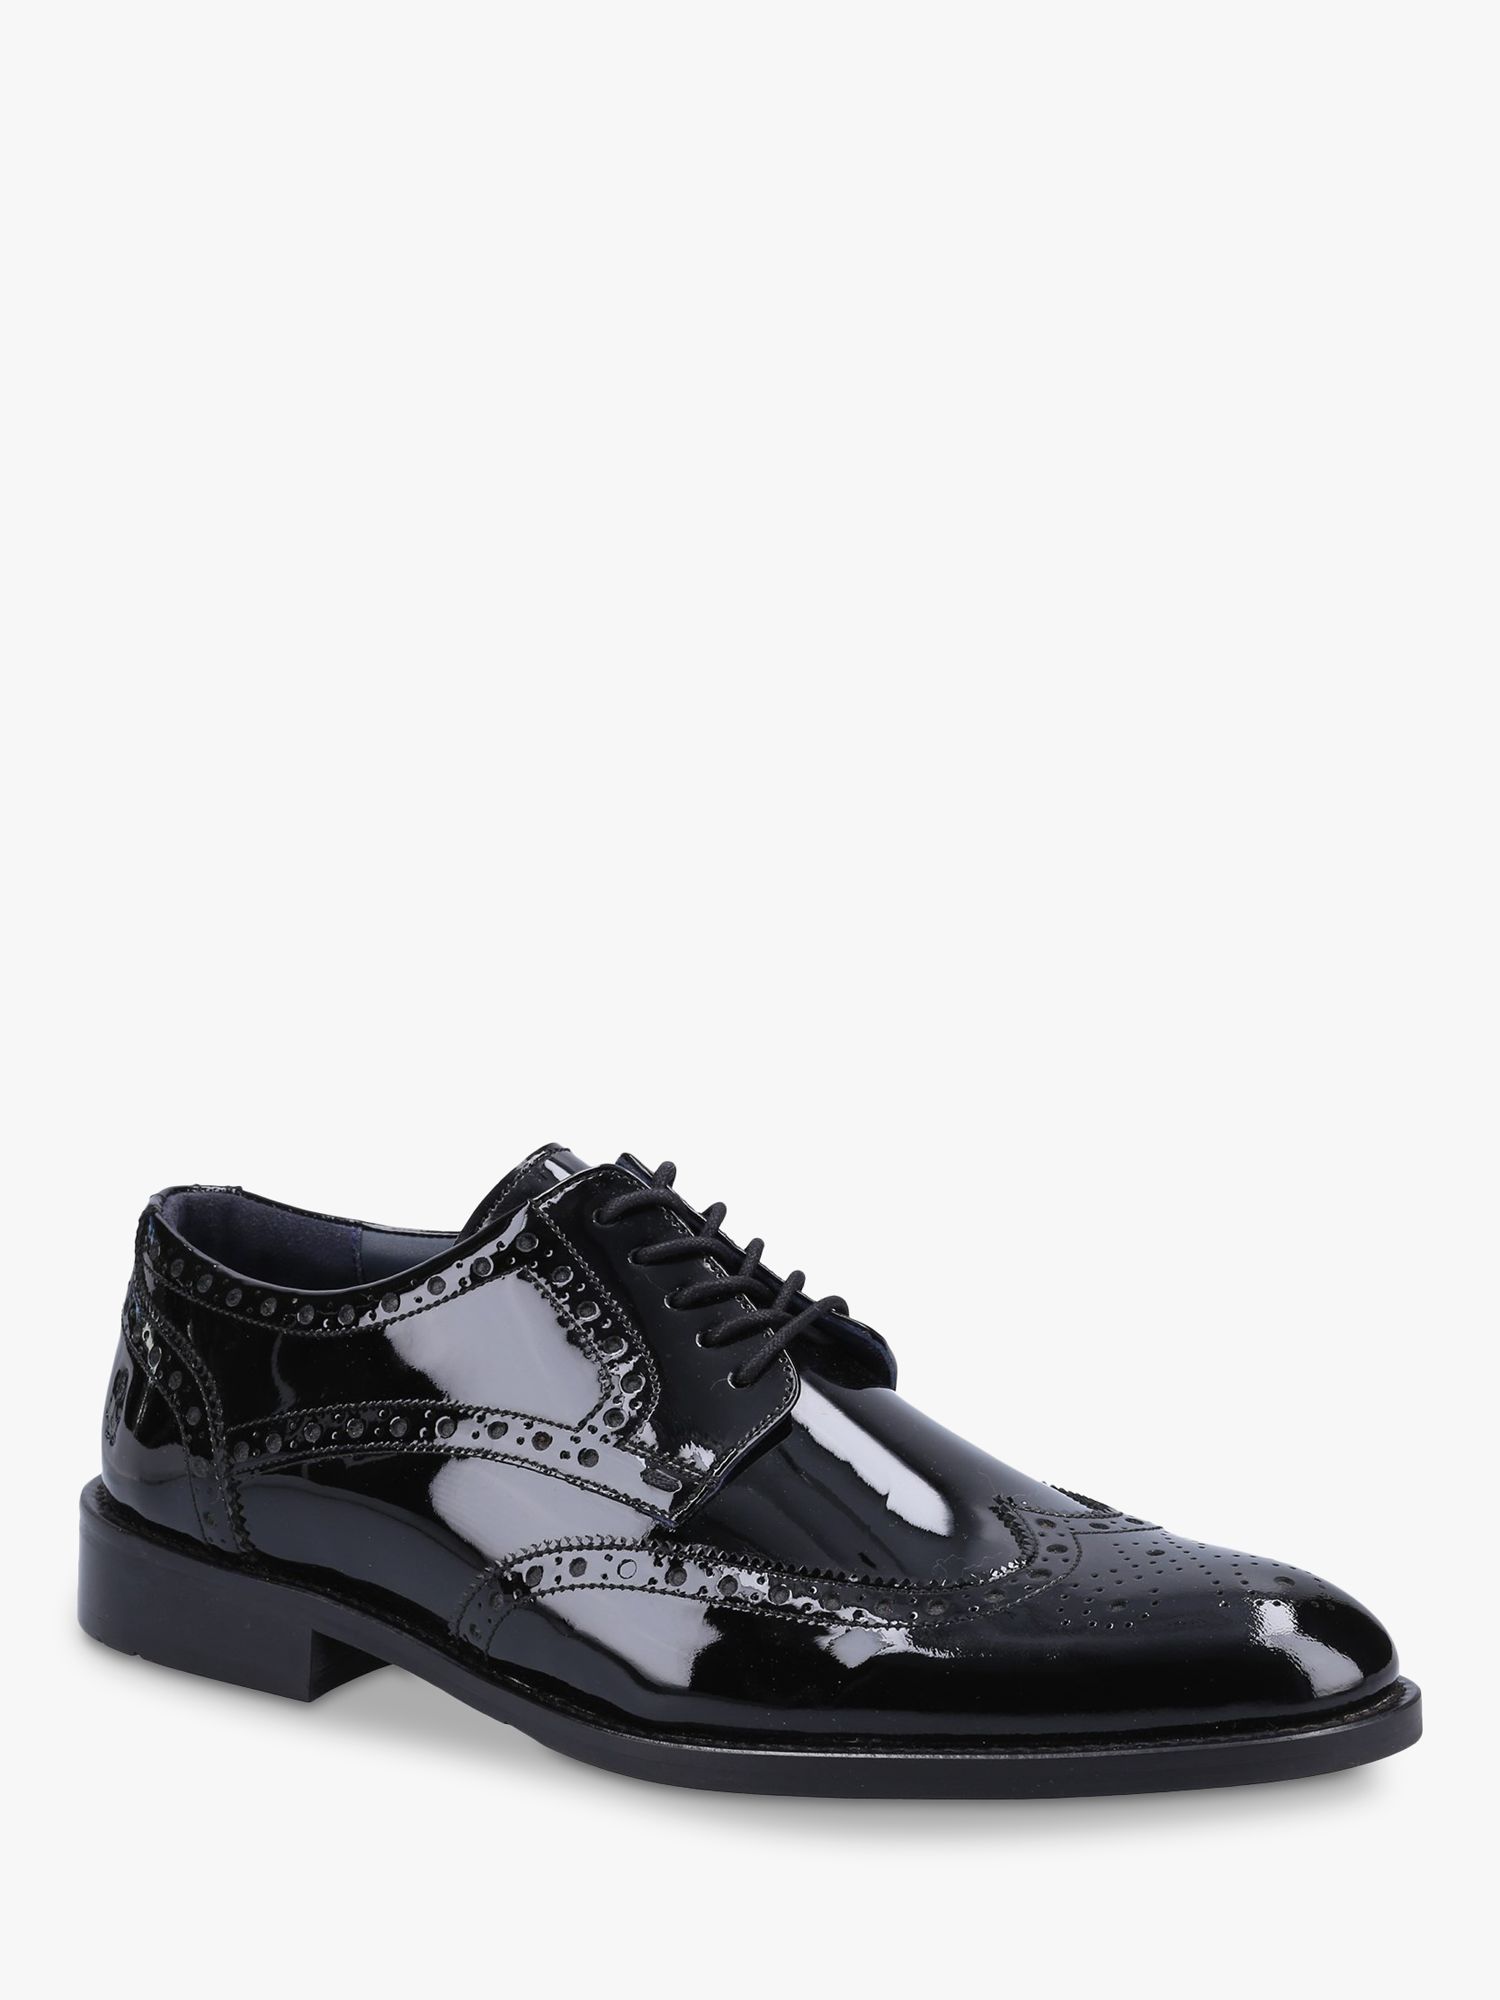 Hush Puppies Dustin Patent Leather Brogues, Black at John Lewis & Partners